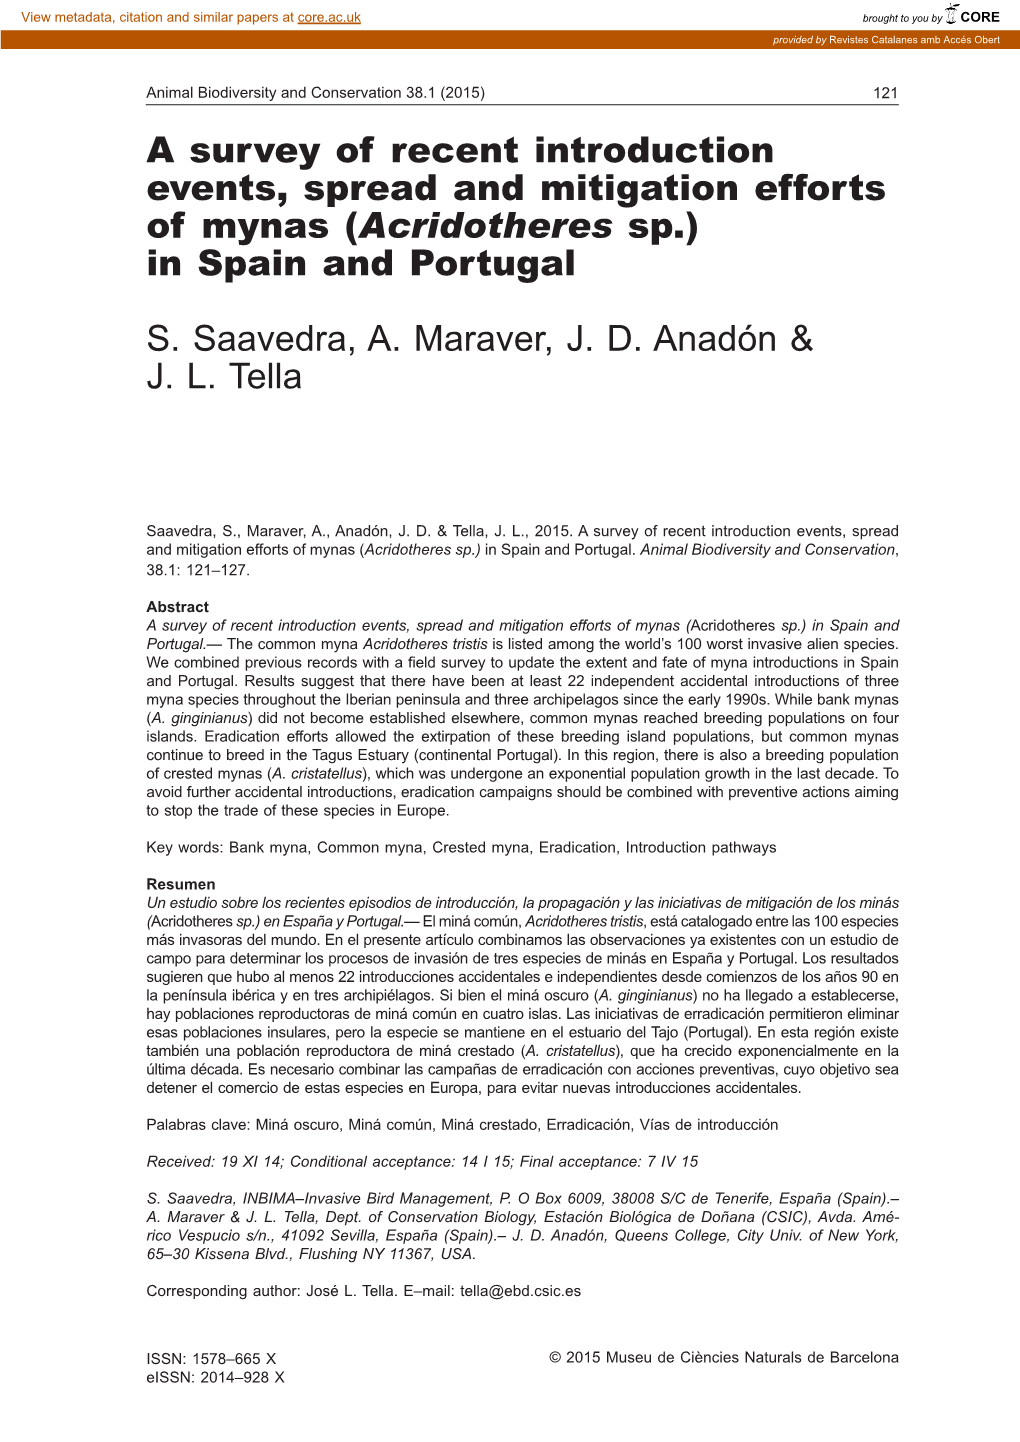 Acridotheres Sp.) in Spain and Portugal